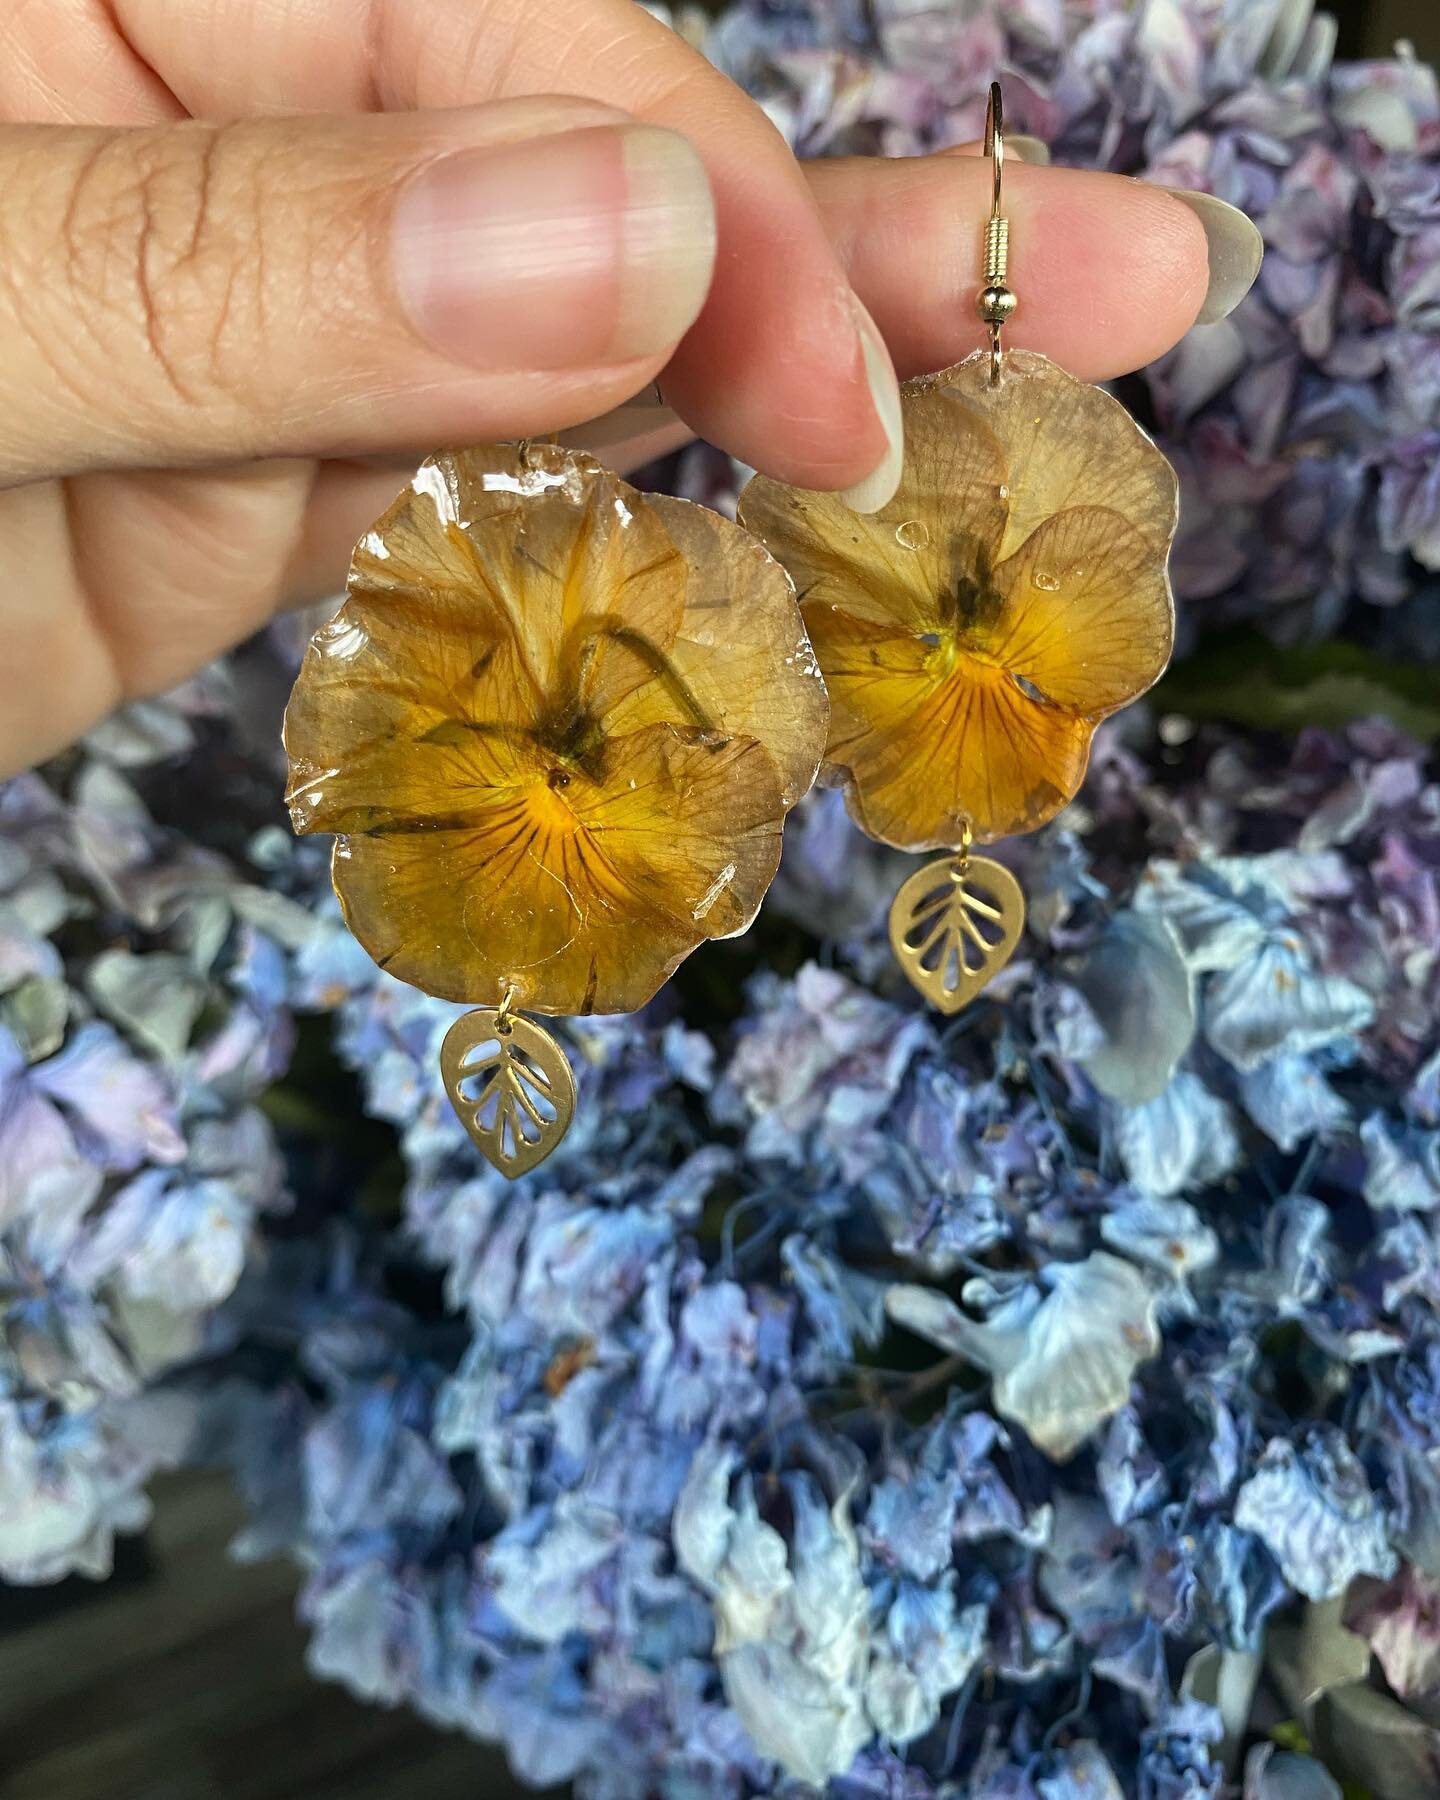 Flower pressed earrings now available at La Sire&ntilde;a boutique in Bolinas!

Handmade with locally foraged flowers, or sourced from local farmers. 

Thanks for your support! @lasirenabotique #flowerresin #pressedflowers #flowerart #flowerjewellery